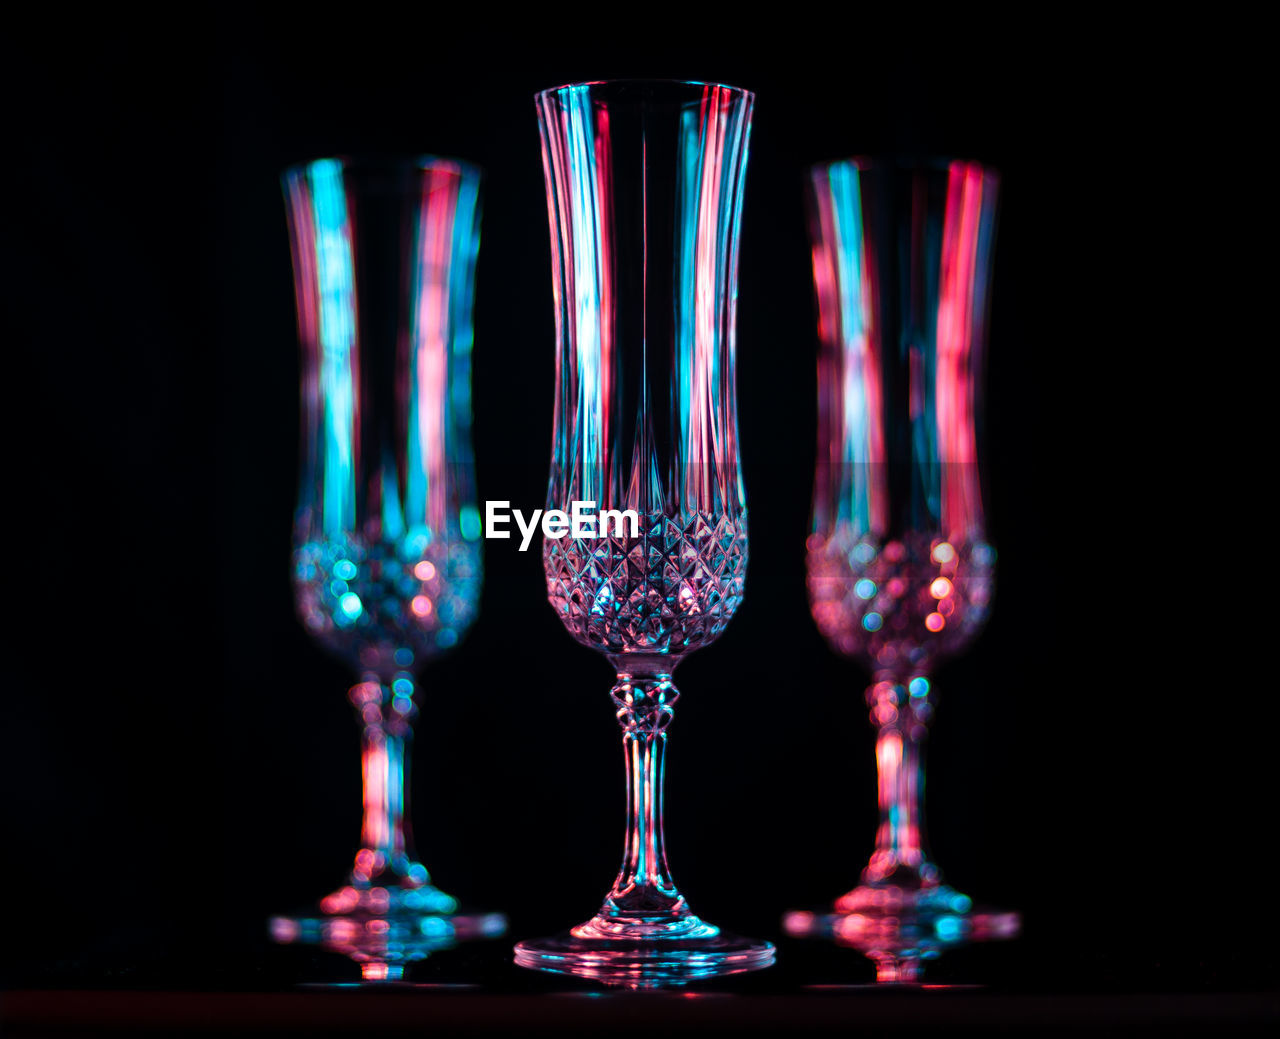 Close-up of wine glasses on table against black background